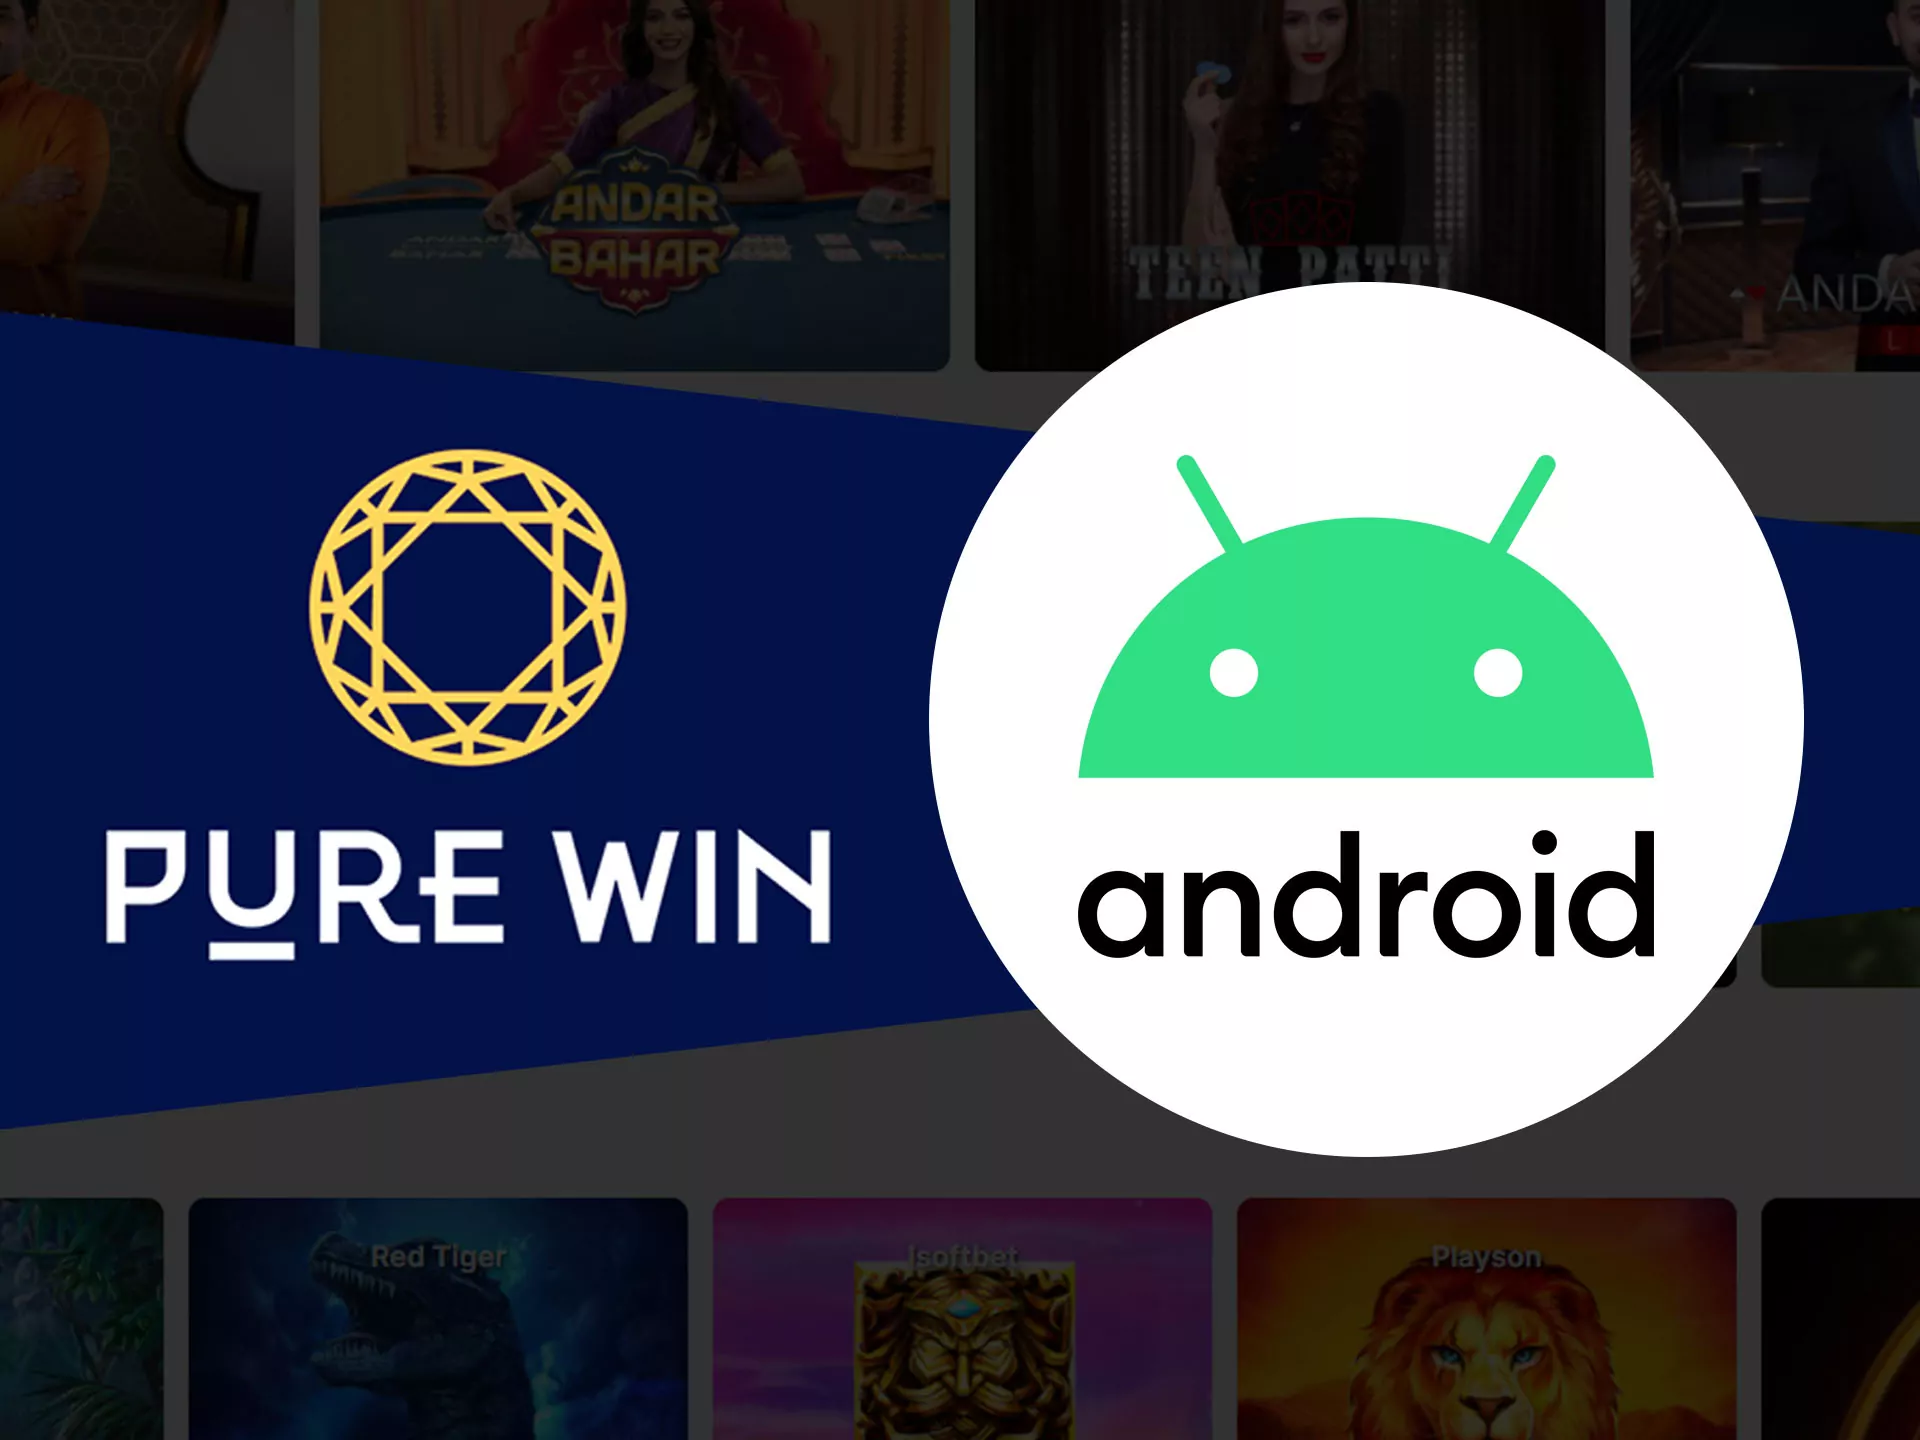 Pure Win Android app is ready for downloading.